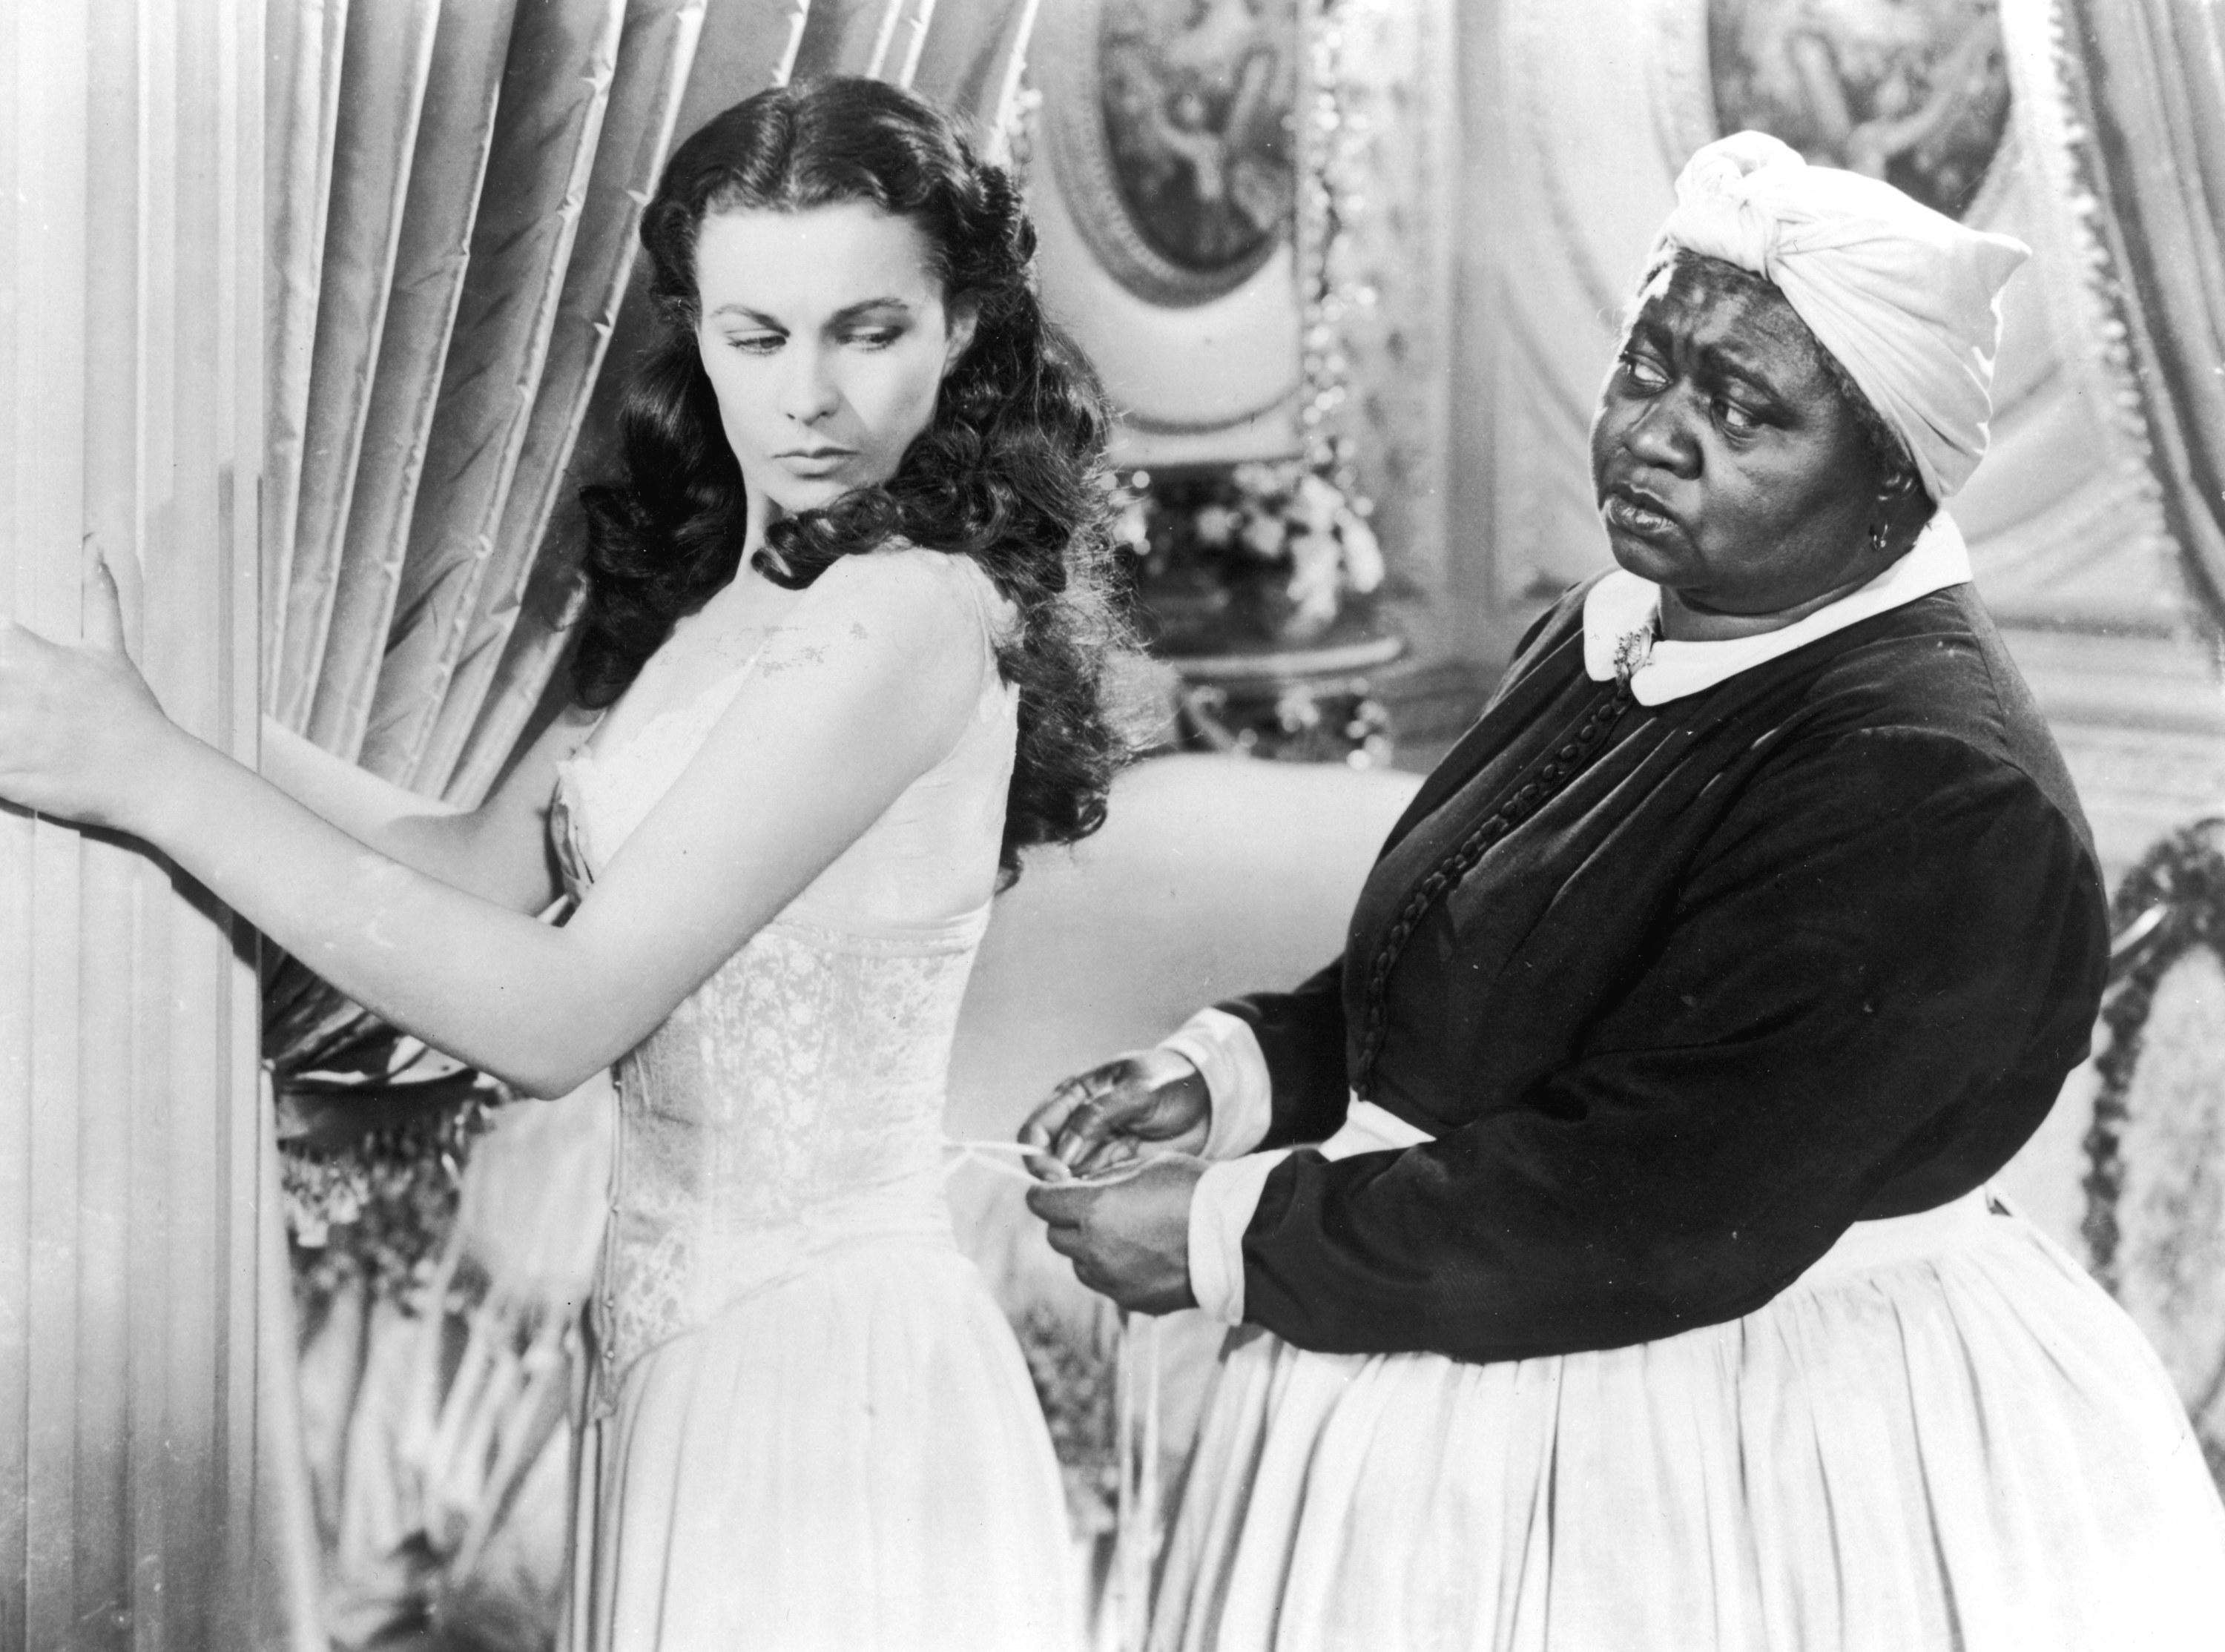 Vivien Leigh holds onto a pillar as Hattie McDaniel tightens her corset in &quot;Gone with the Wind&quot;